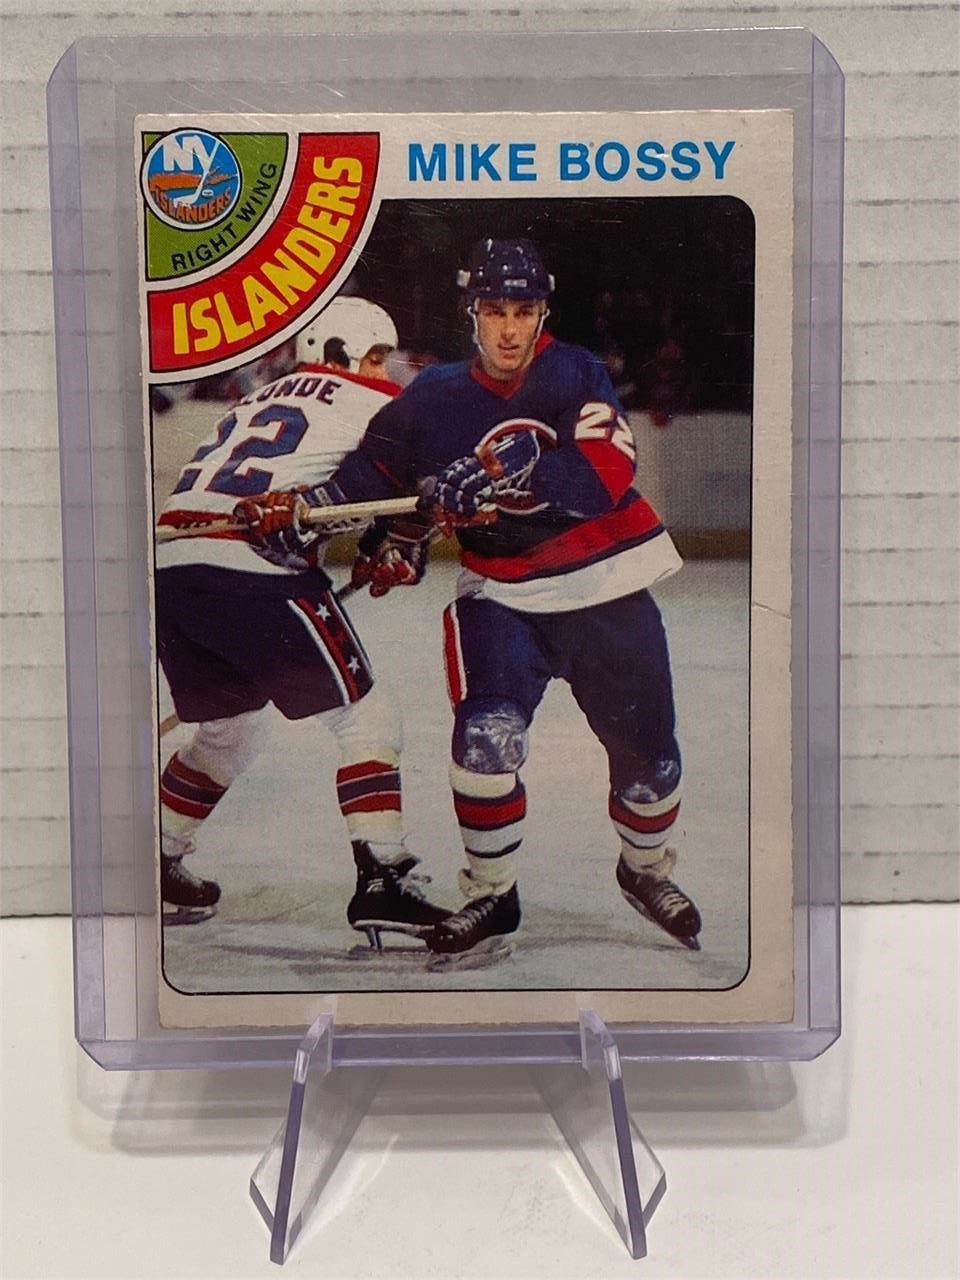 VINTAGE HOCKEY CARD CONSIGNMENT PART 1